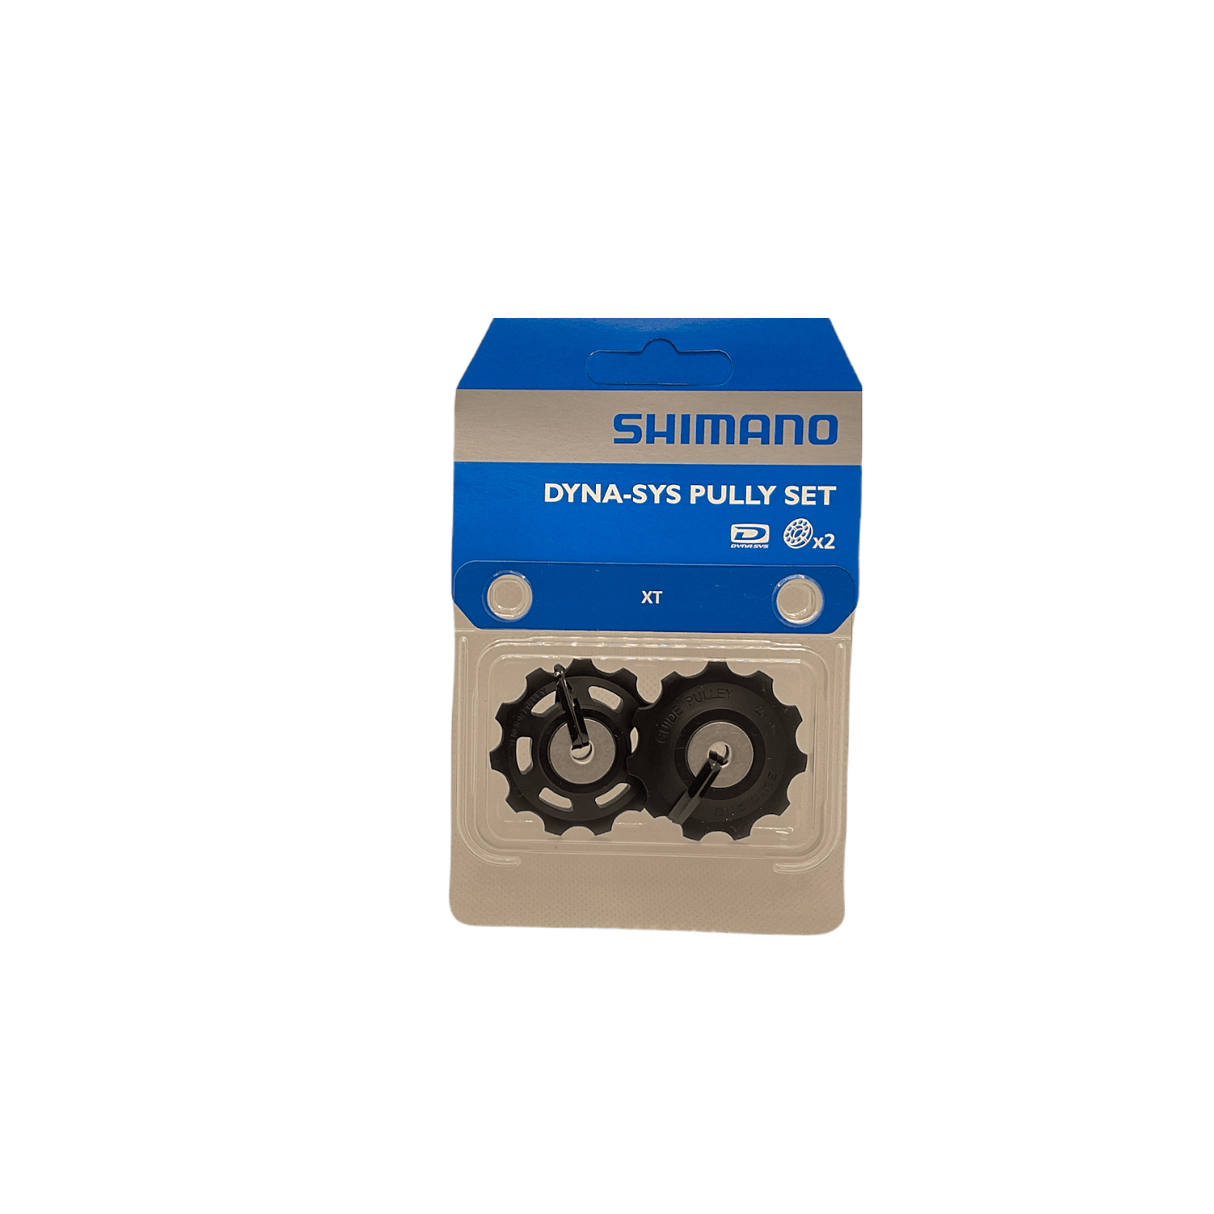 Shimano Spares Deore XT RD-M786/M773 tension and guide pulley set